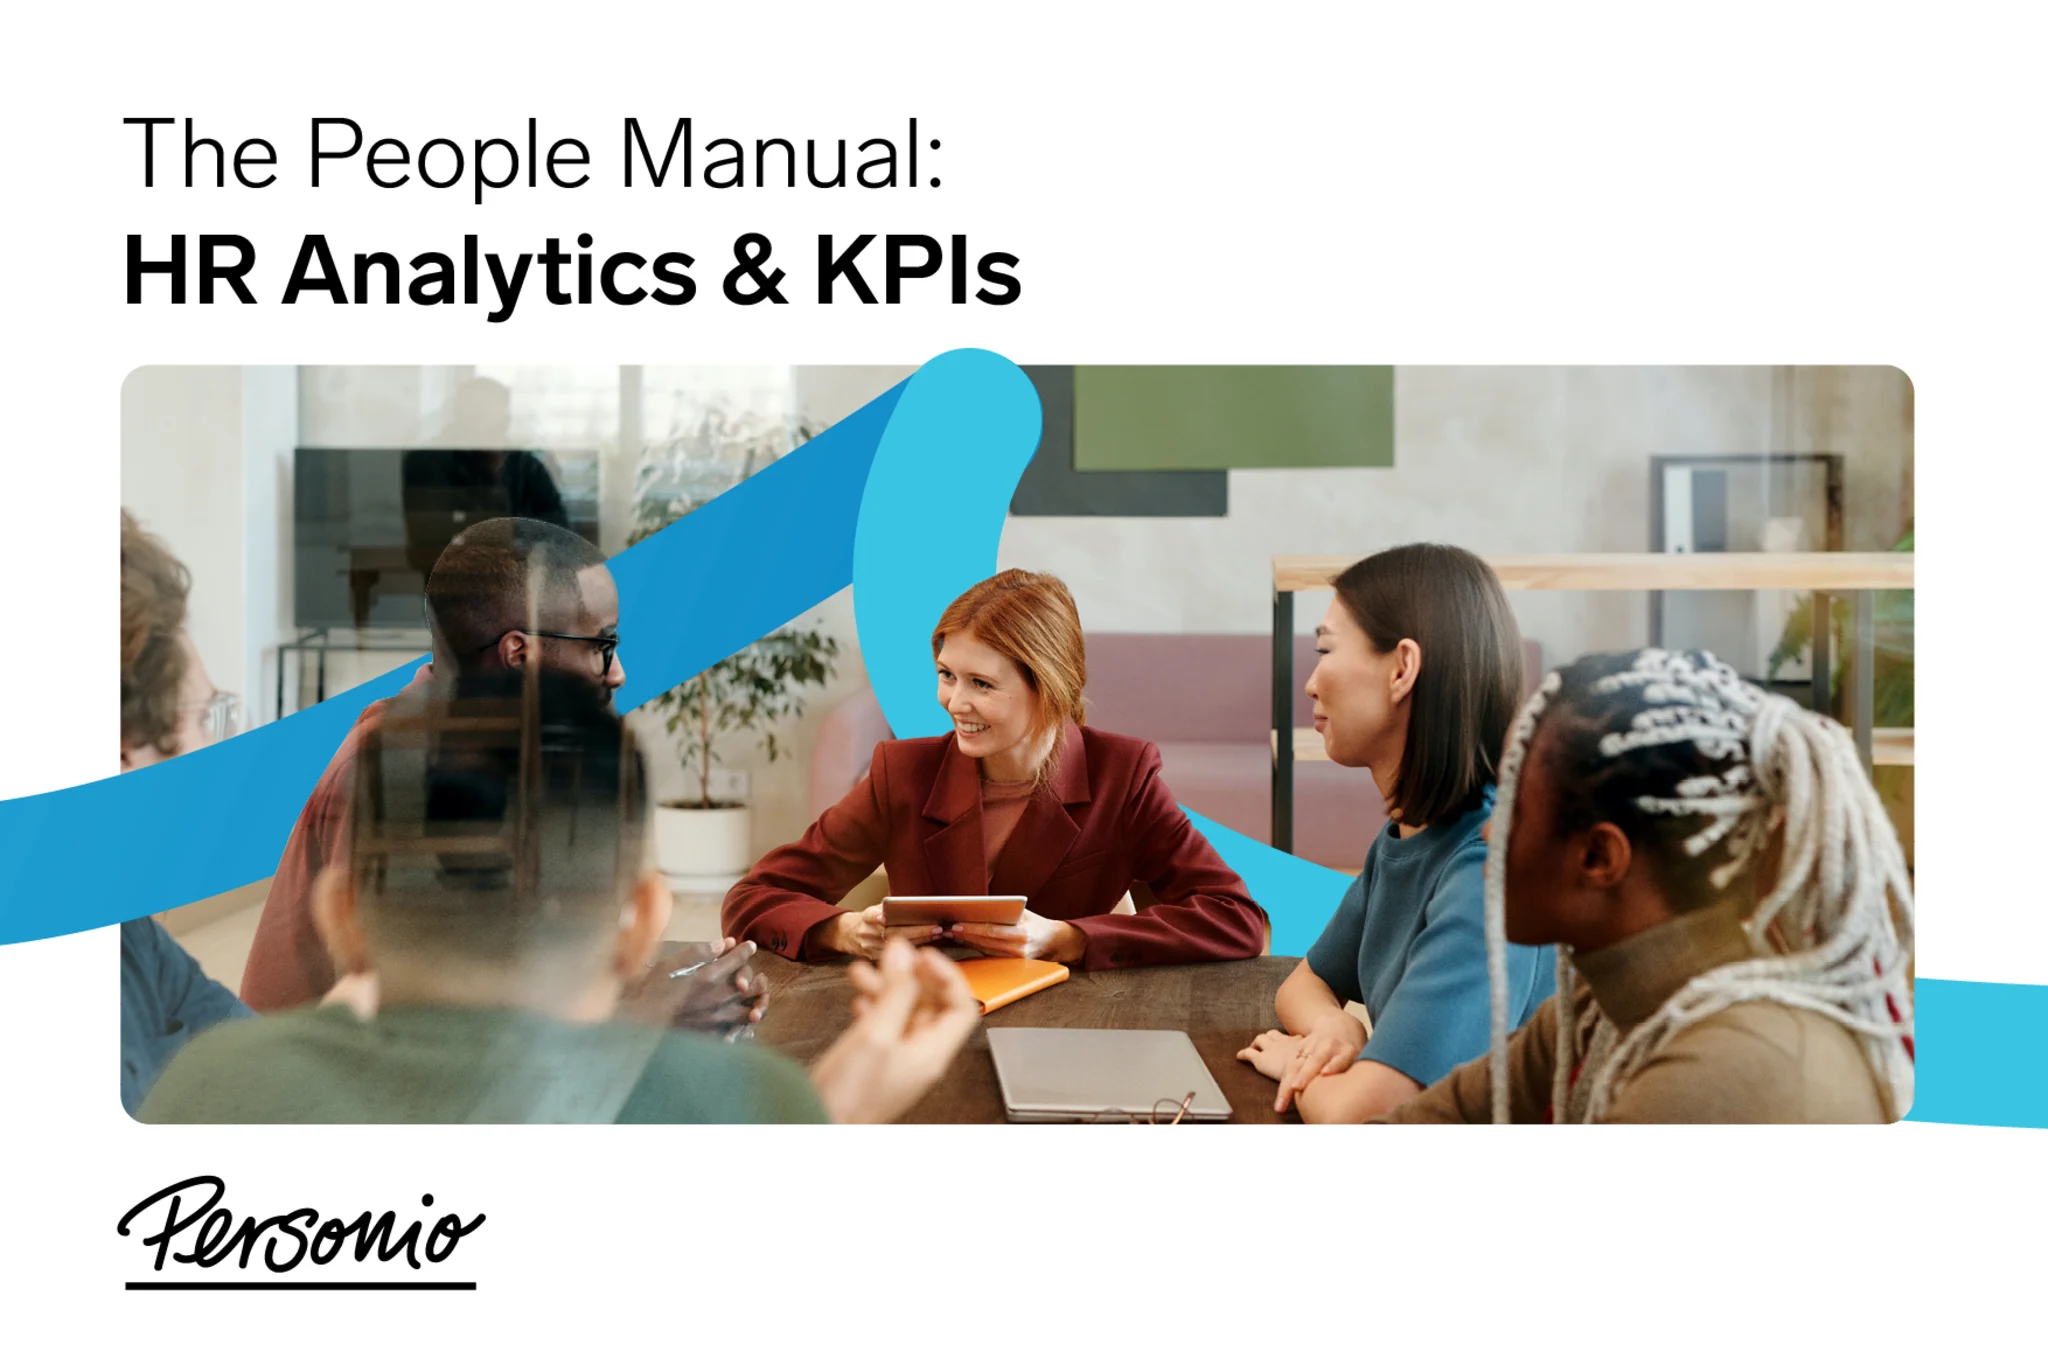 The People Manual: HR Analytics